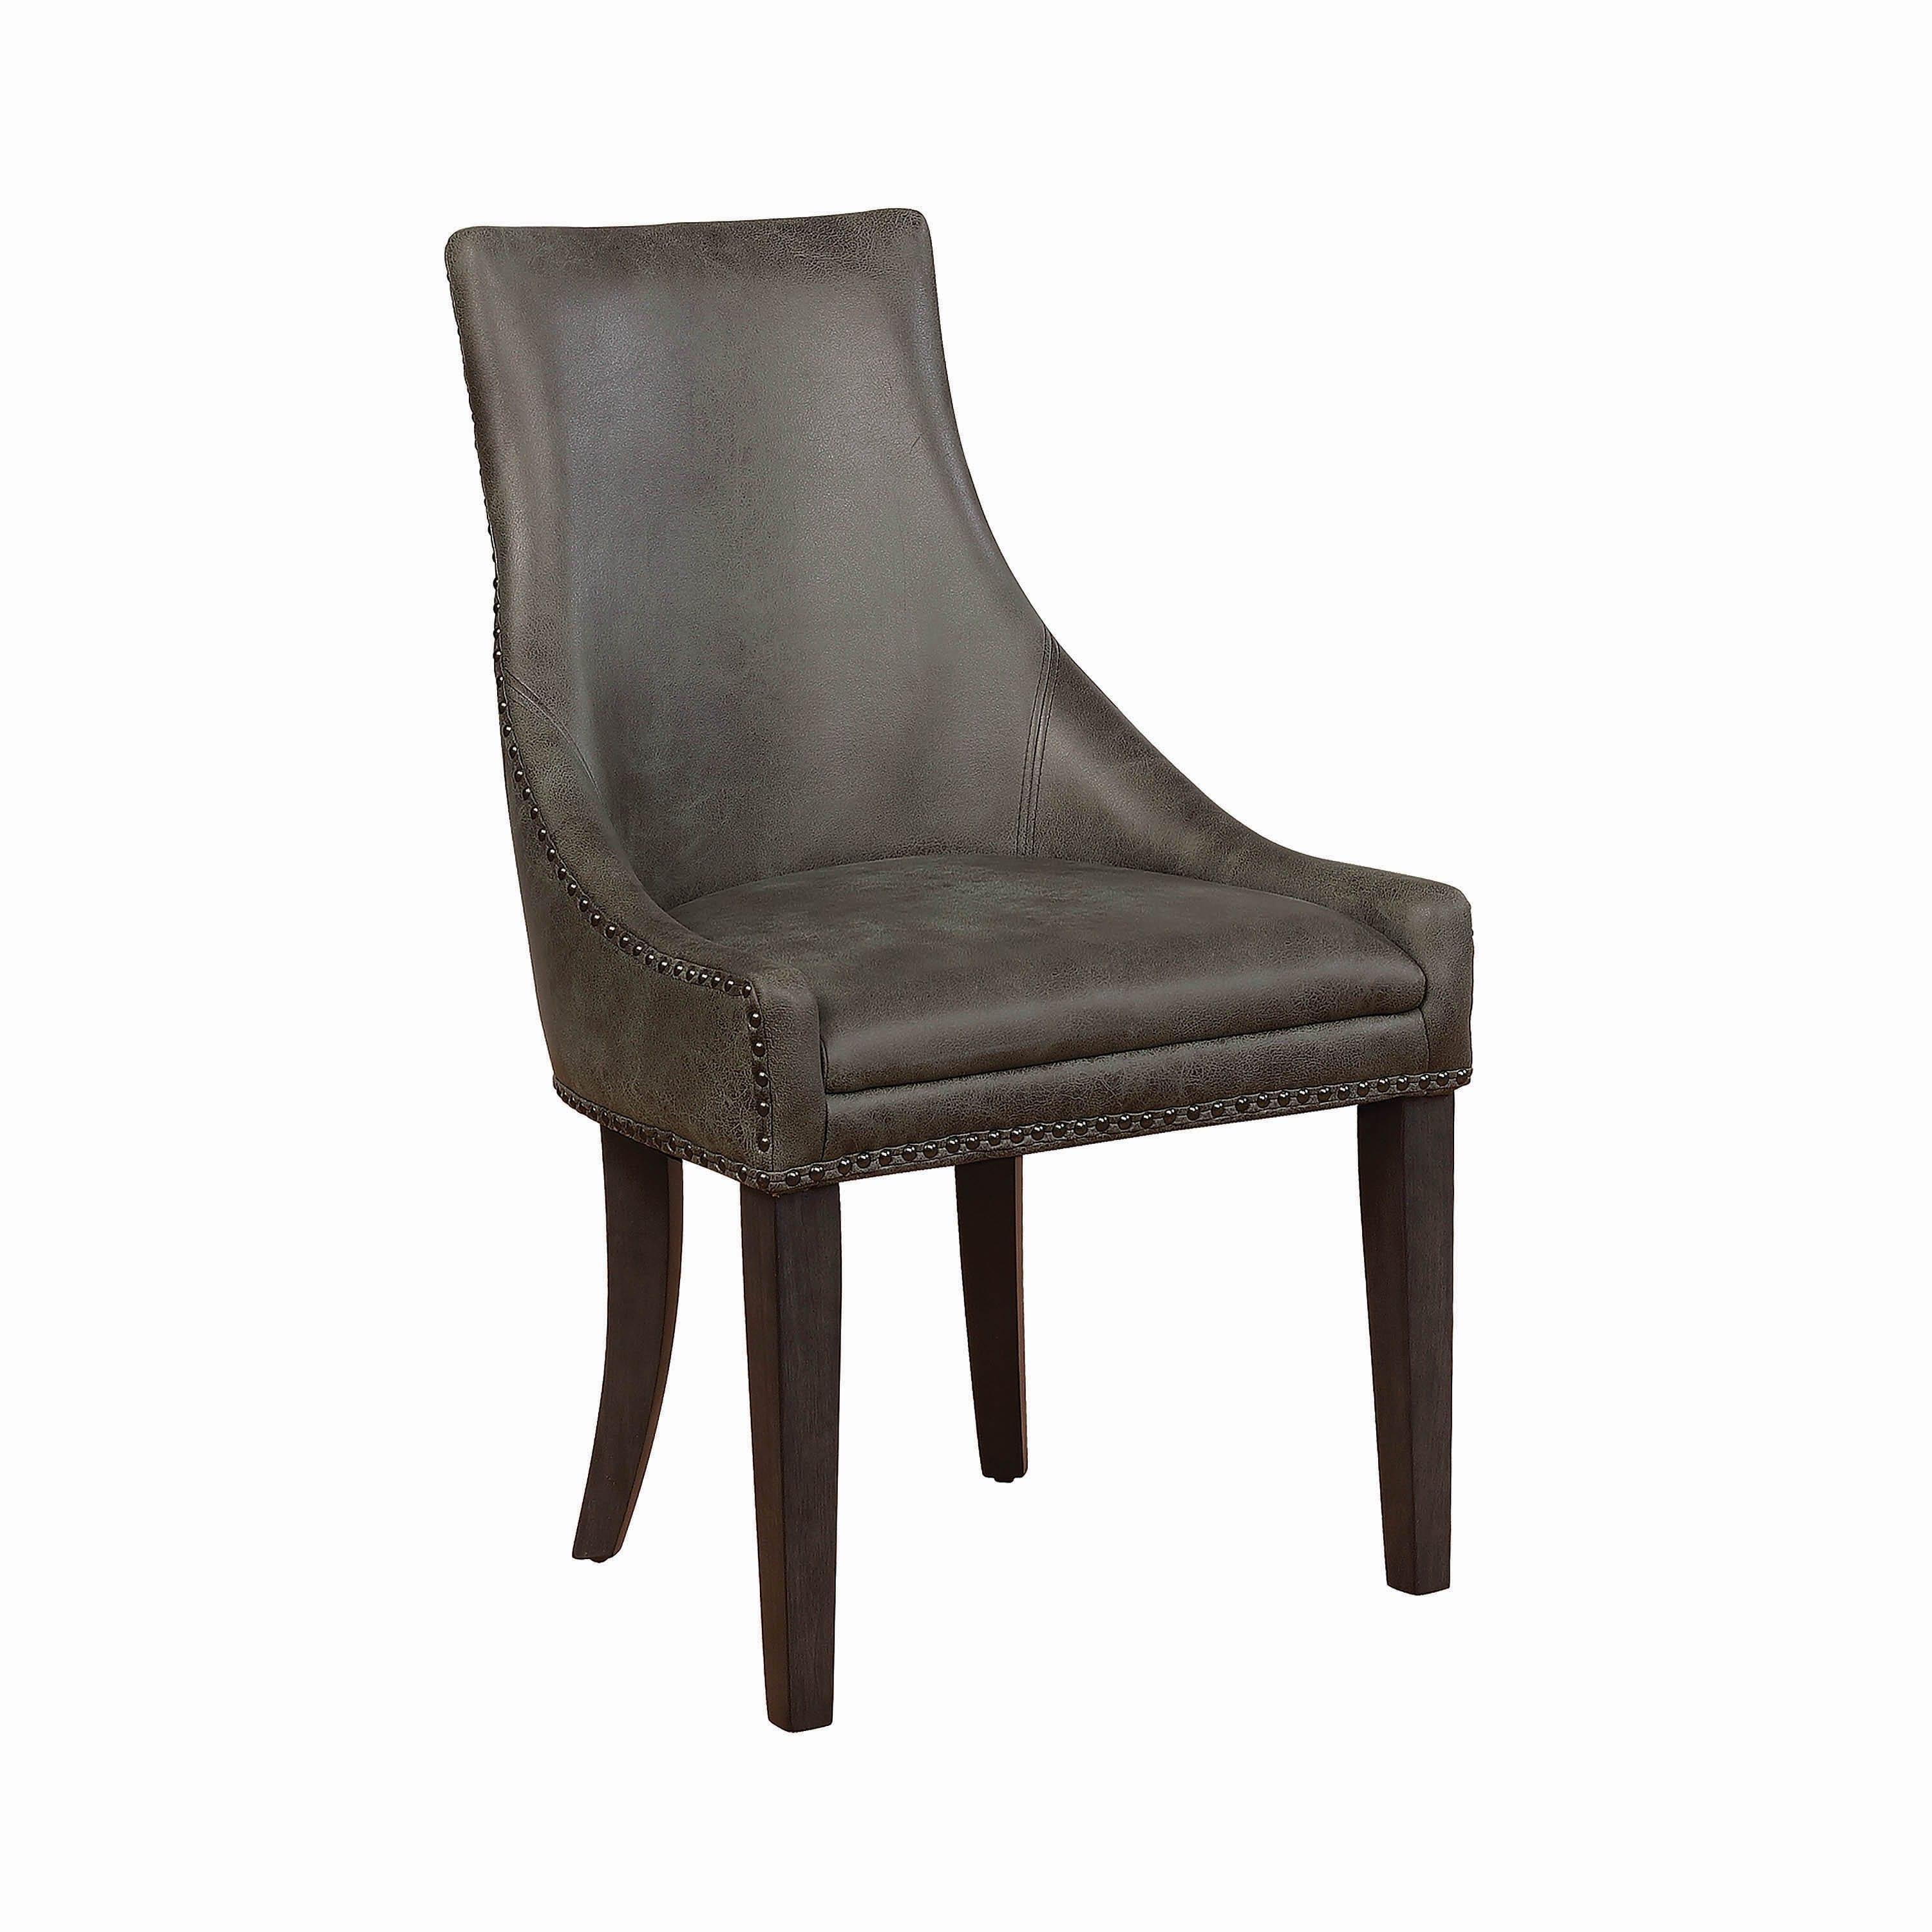 Modern Dining Chair Phelps 121715 in Brown Faux Leather